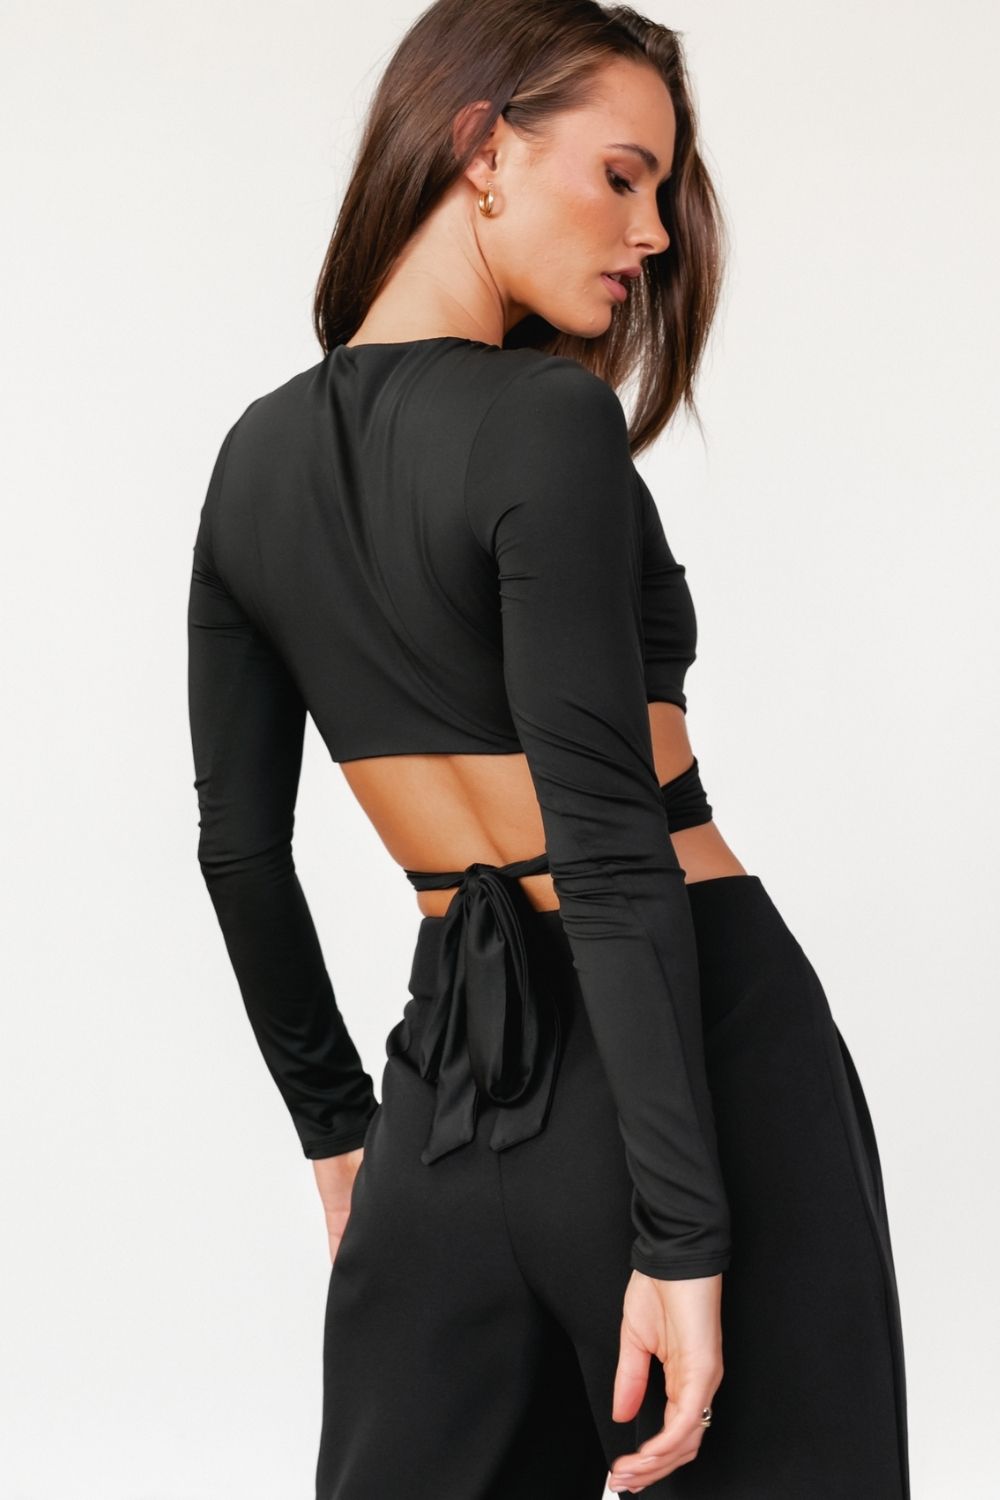 Full Sleeves Black Body Hugging Crop Top – Styched Fashion